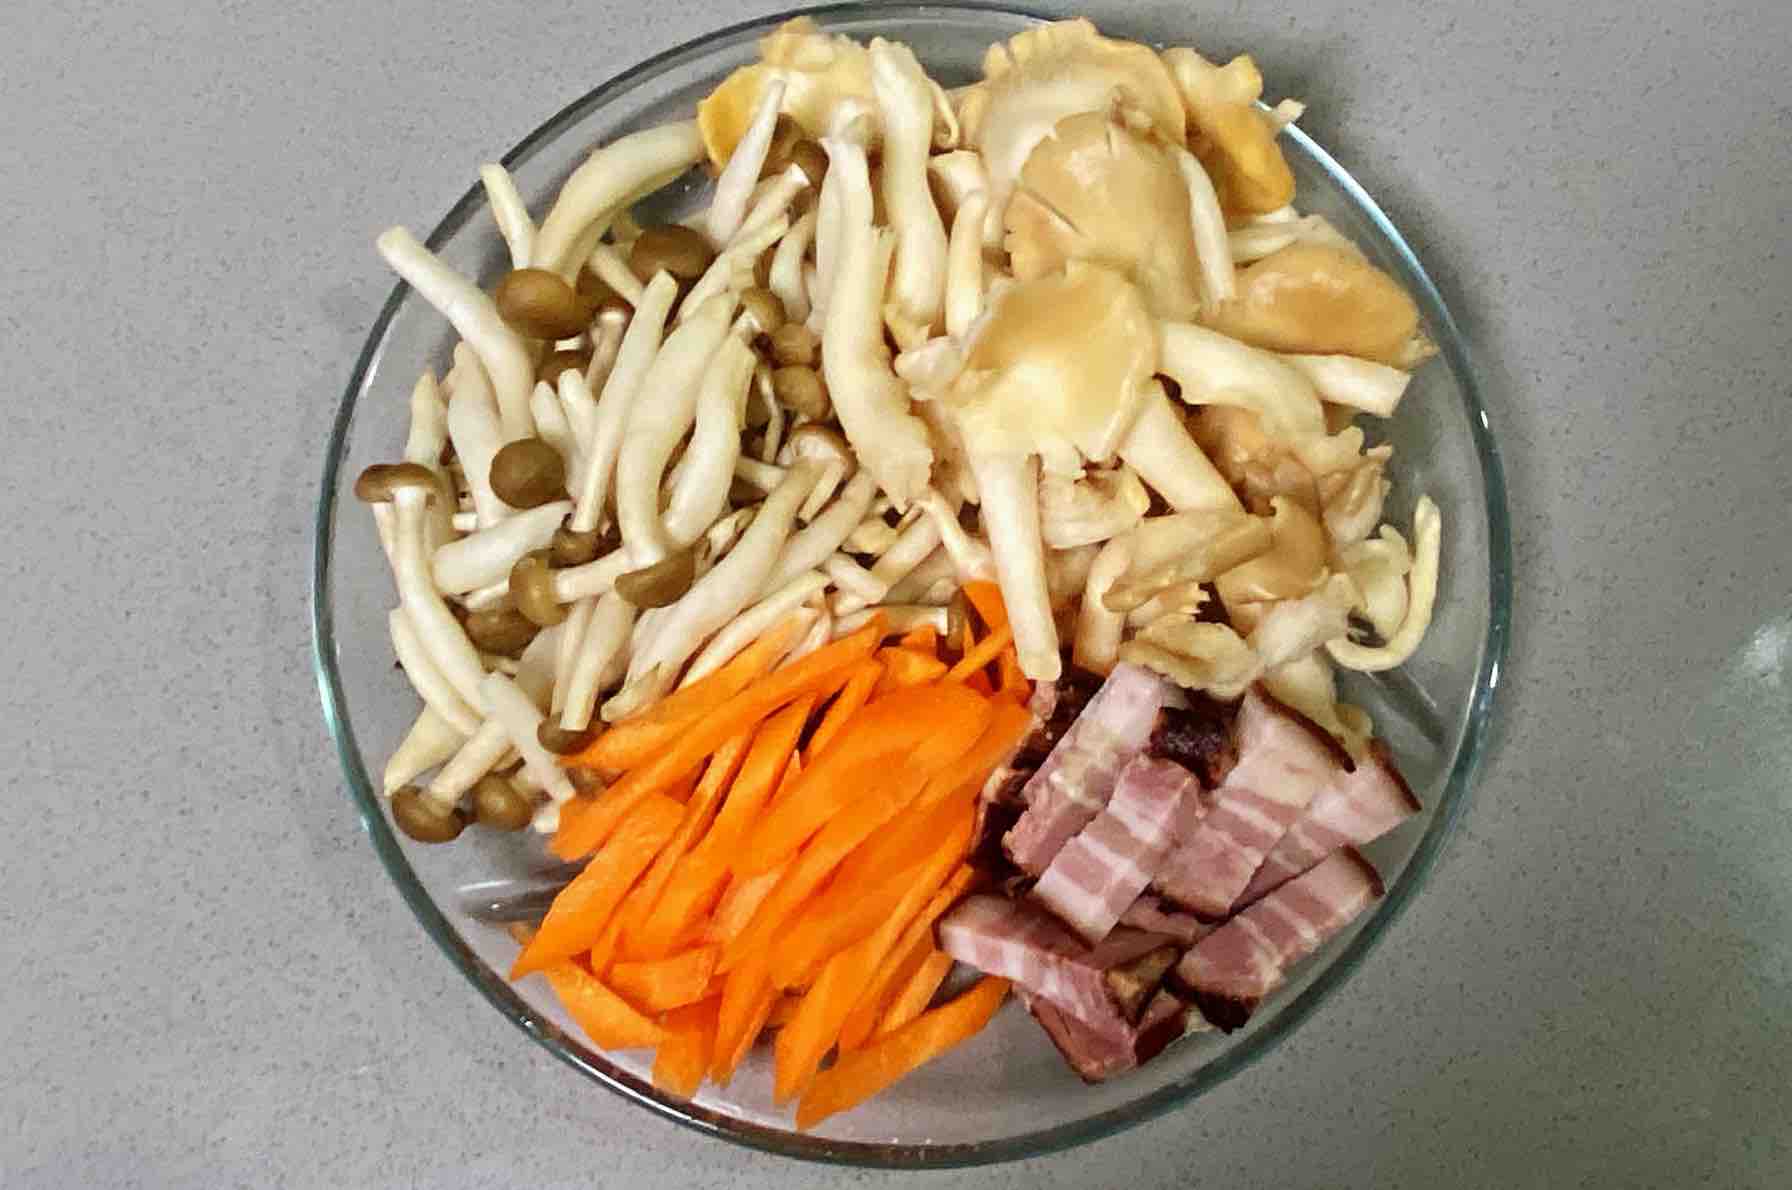 [recipe for Pregnant Women] Stir-fried Bacon with Double Mushrooms in A Dry Pot, The Method is Simple But recipe